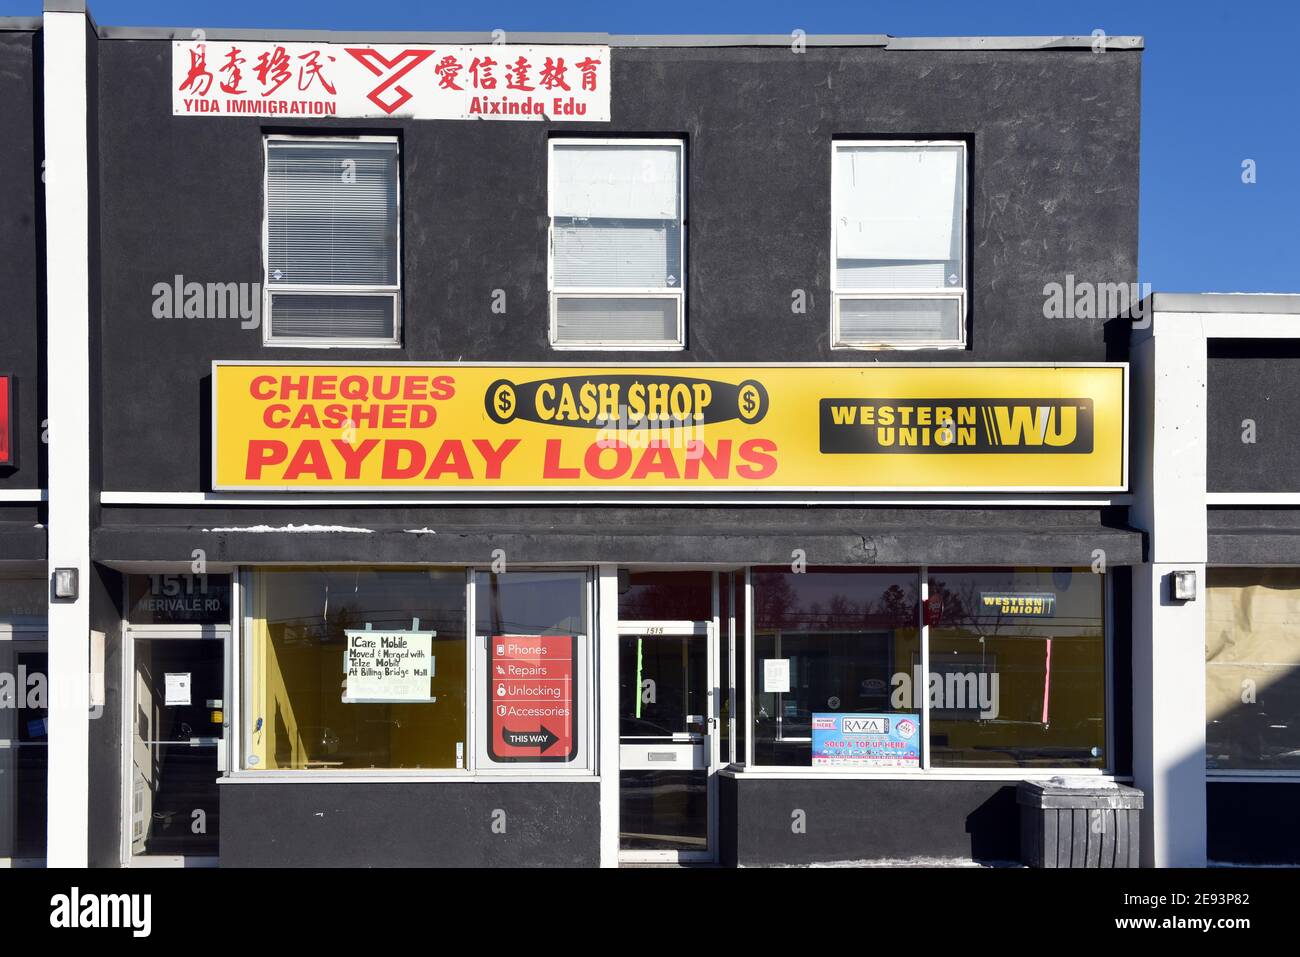 Ottawa, Canada - January 30, 2021: Cash Shop, offering payday loans and cheque cashing, location with Western Union sign on Merivale Road. Stock Photo